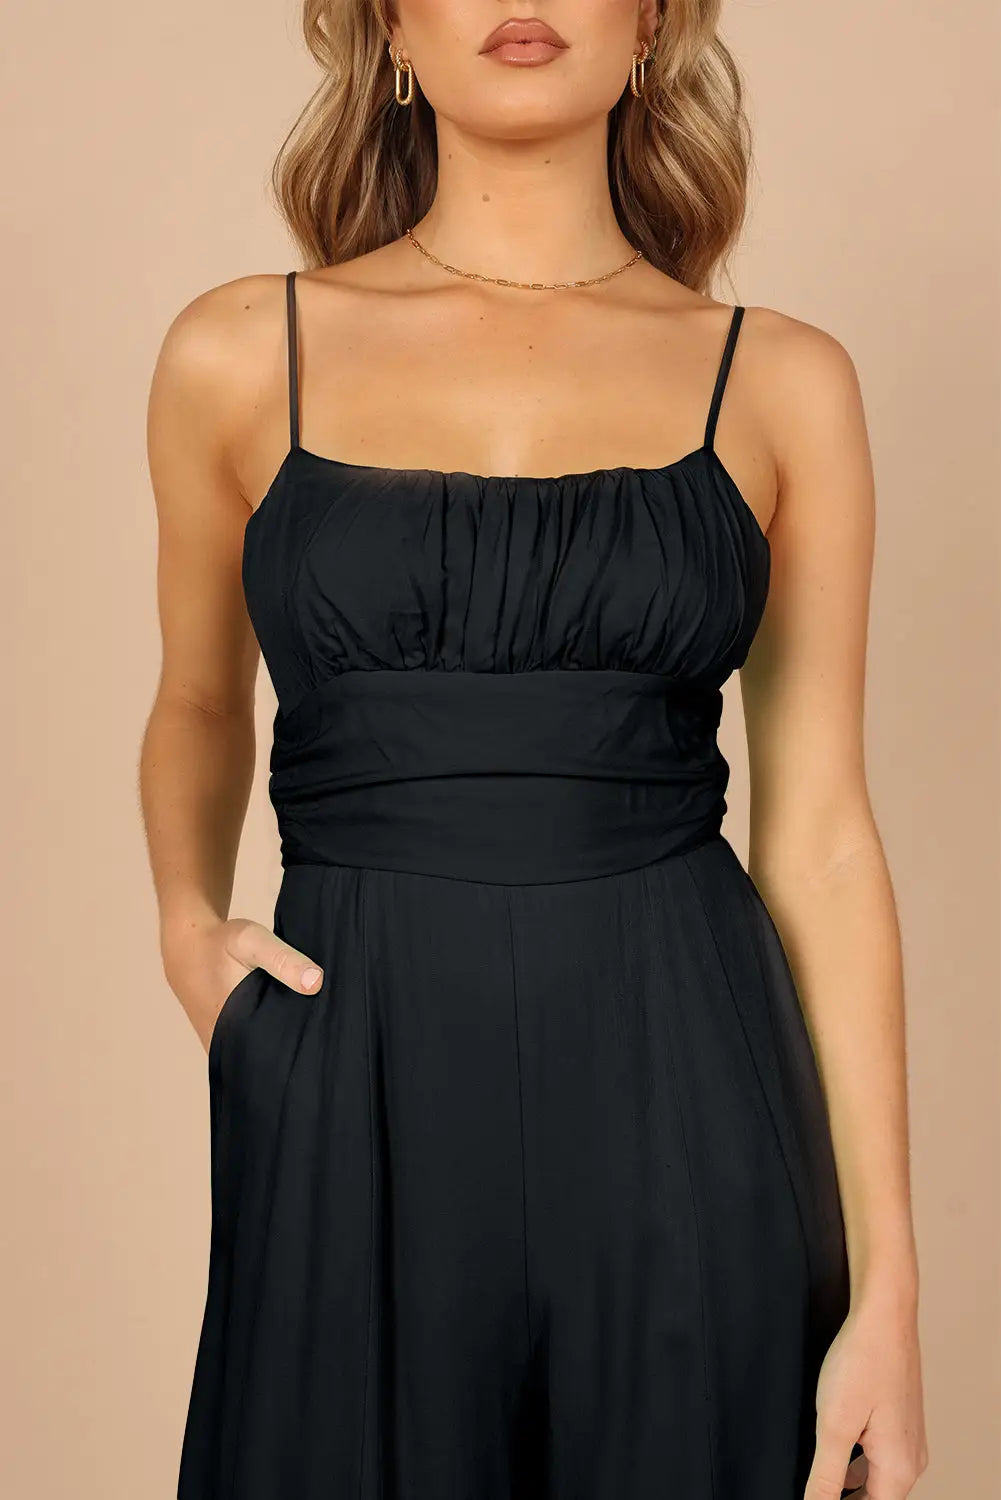 Black spaghetti straps backless knot wide-leg jumpsuit - jumpsuits & rompers